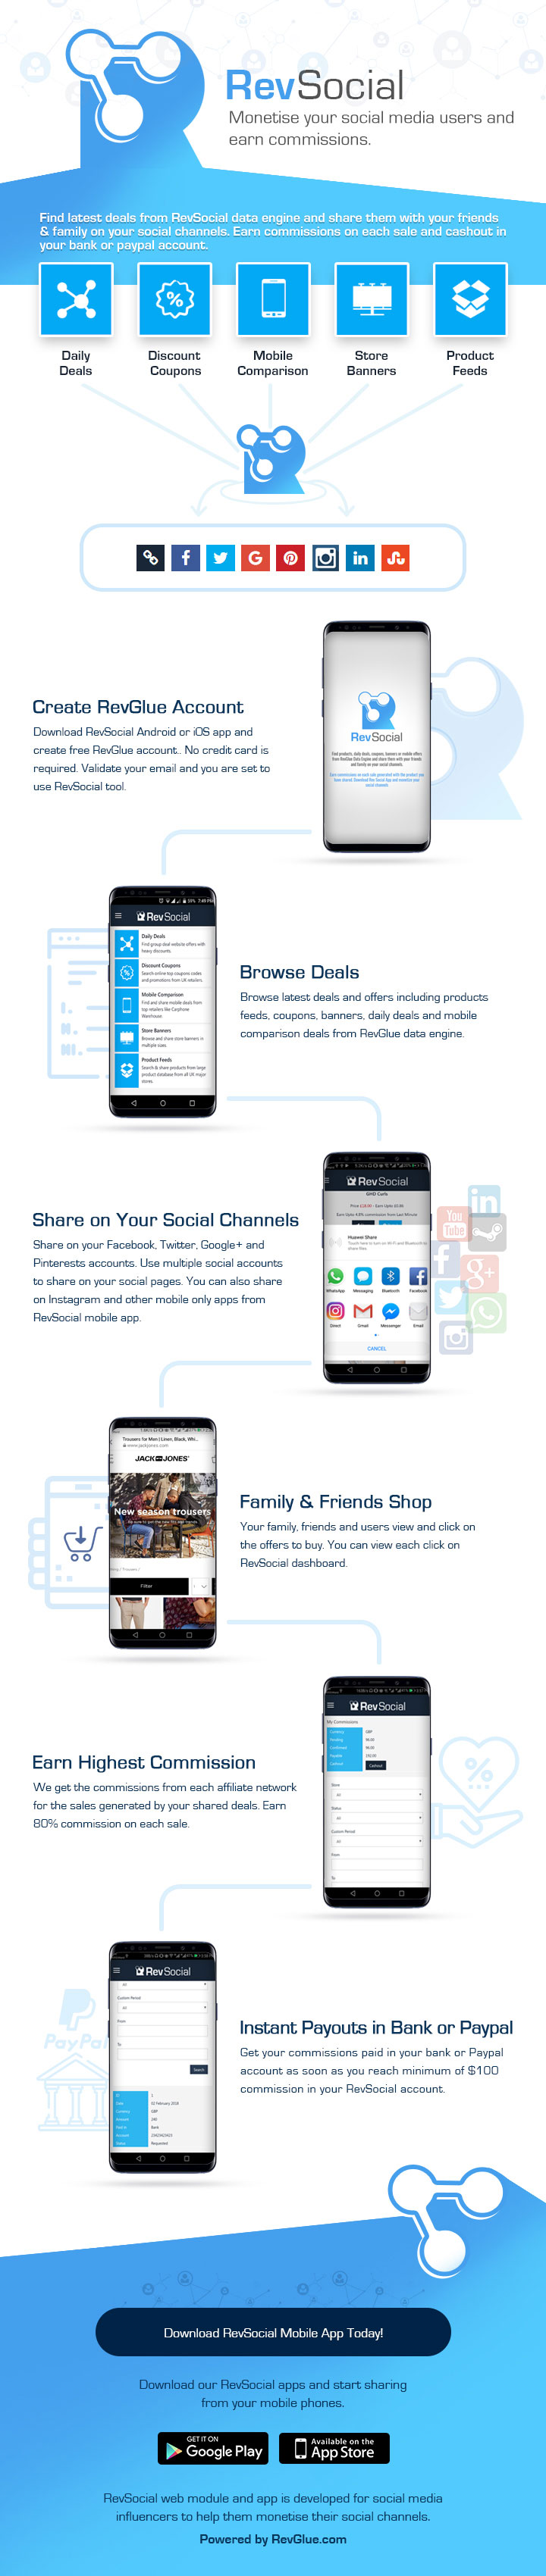 Monetise Facebook, Youtube, Twitter or Instagram with RevSocial - Infographic